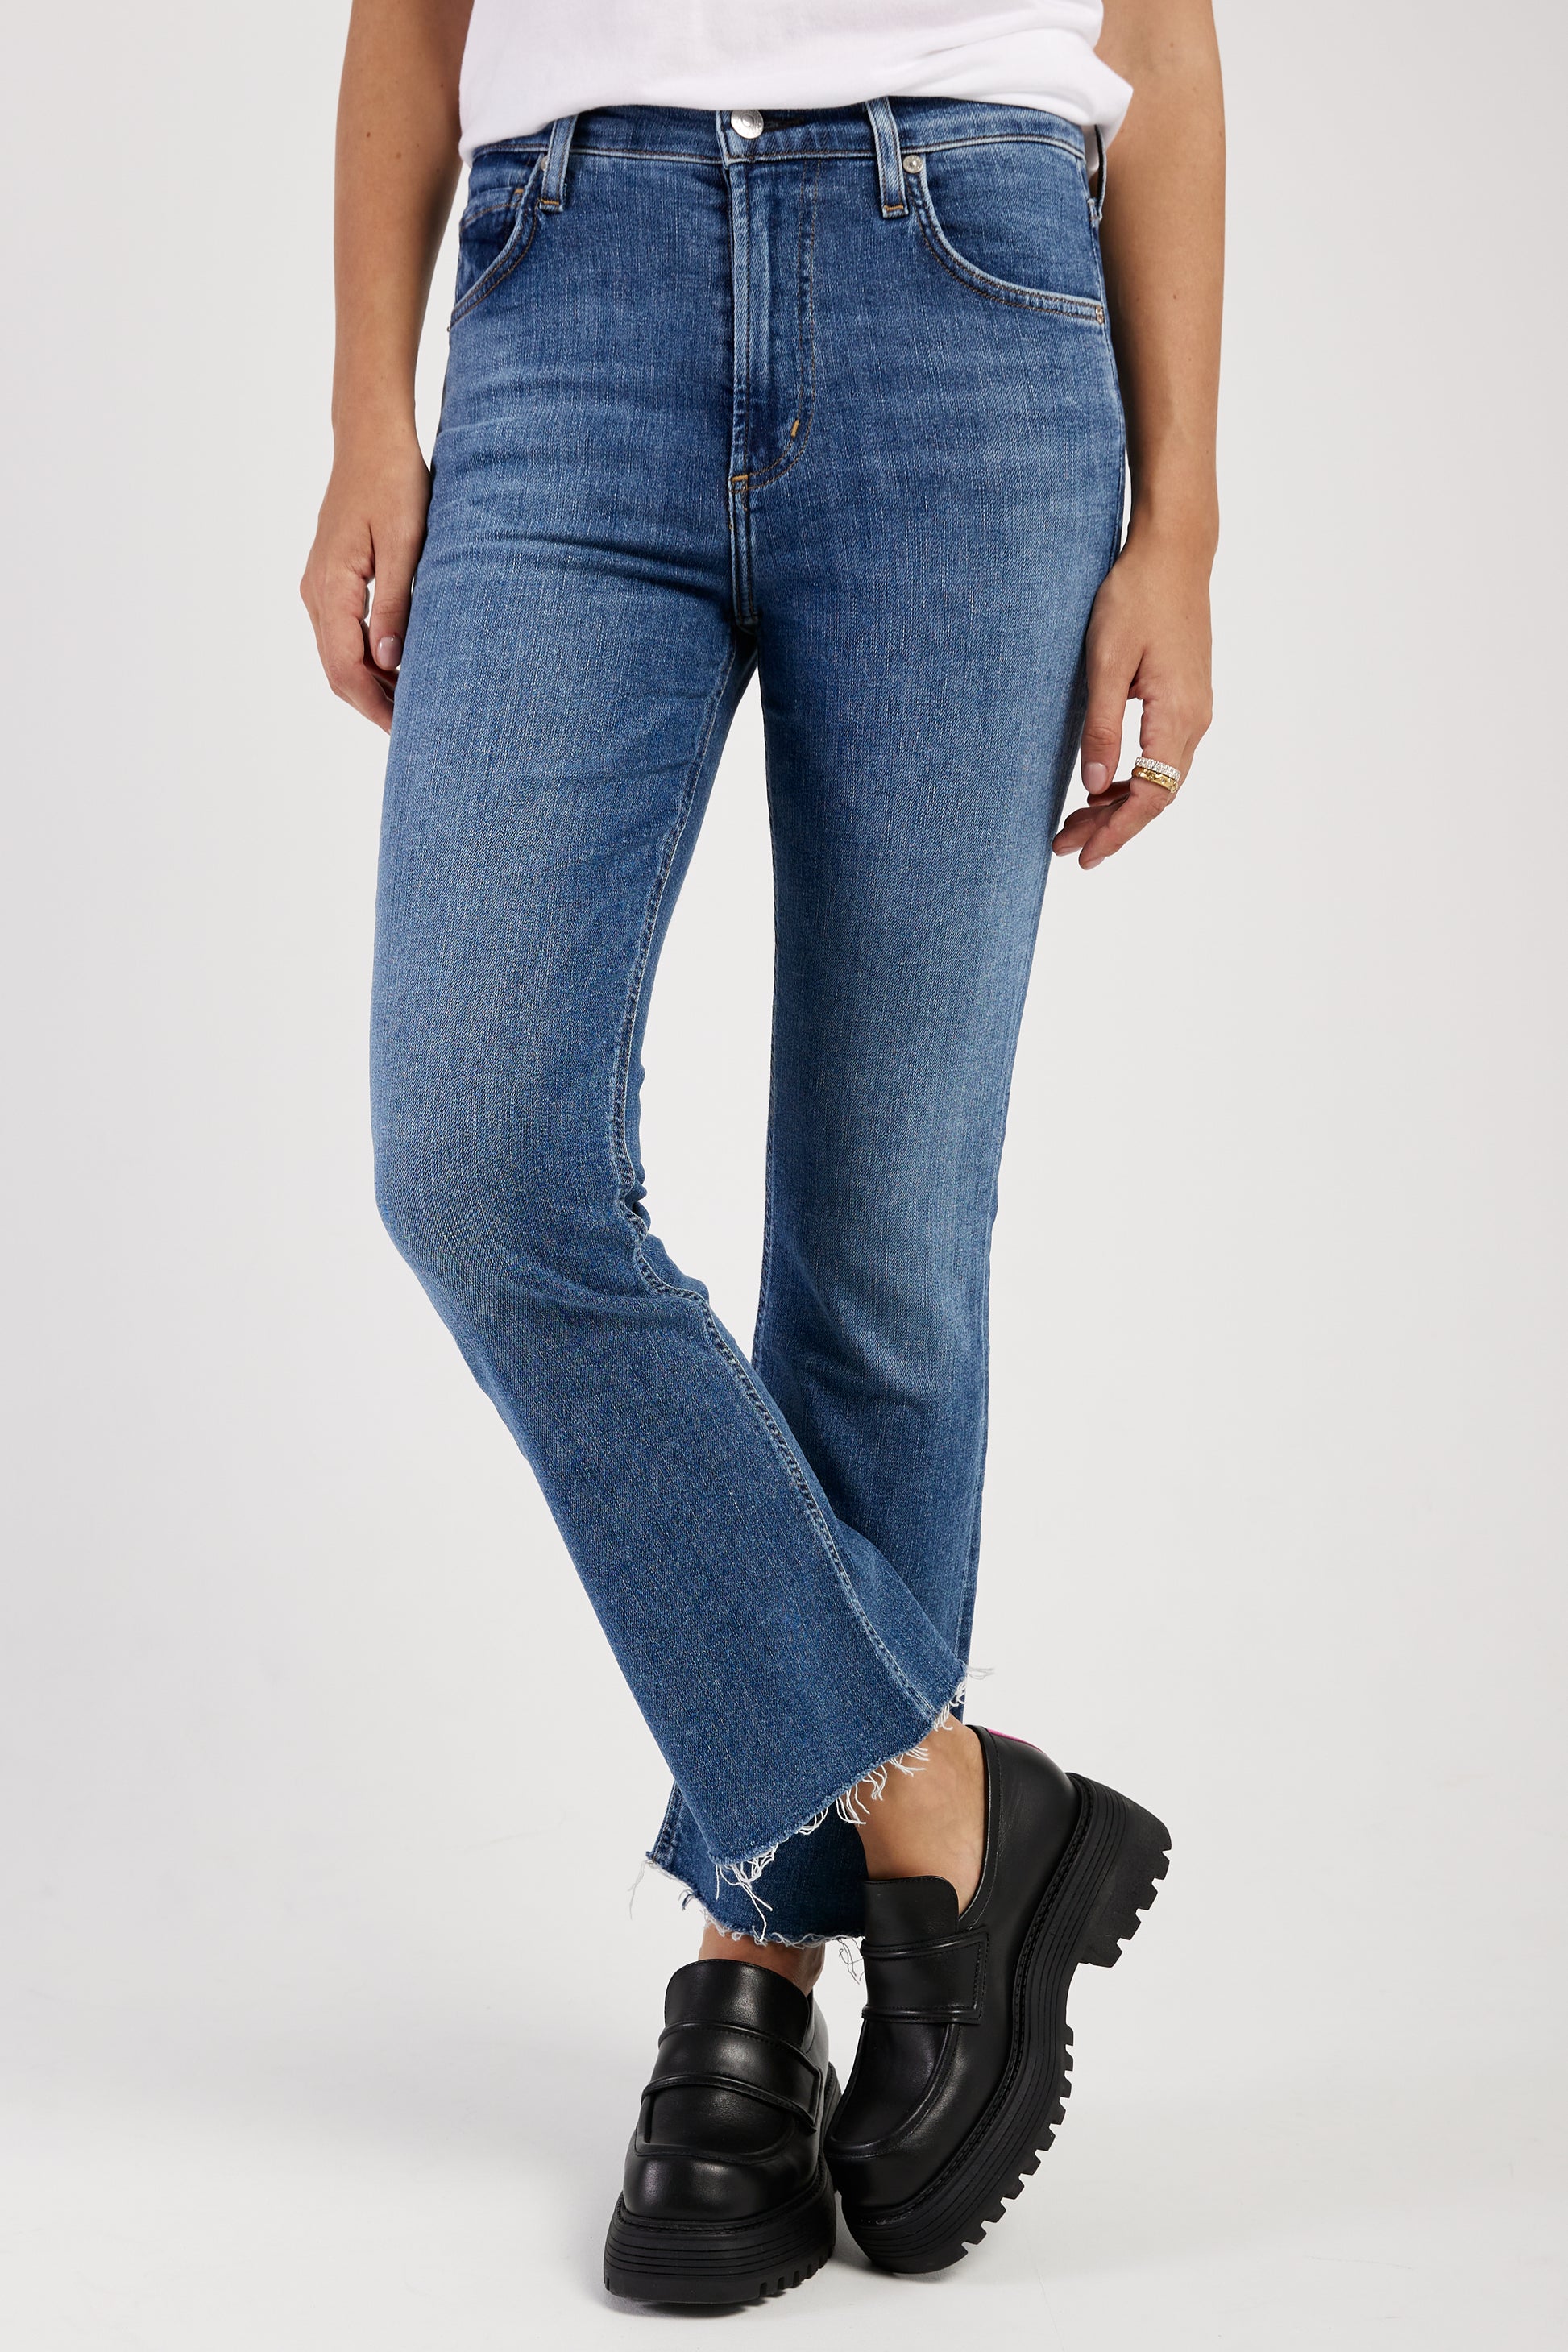 CITIZENS OF HUMANITY Isola Cropped Boot Jean in Lawless